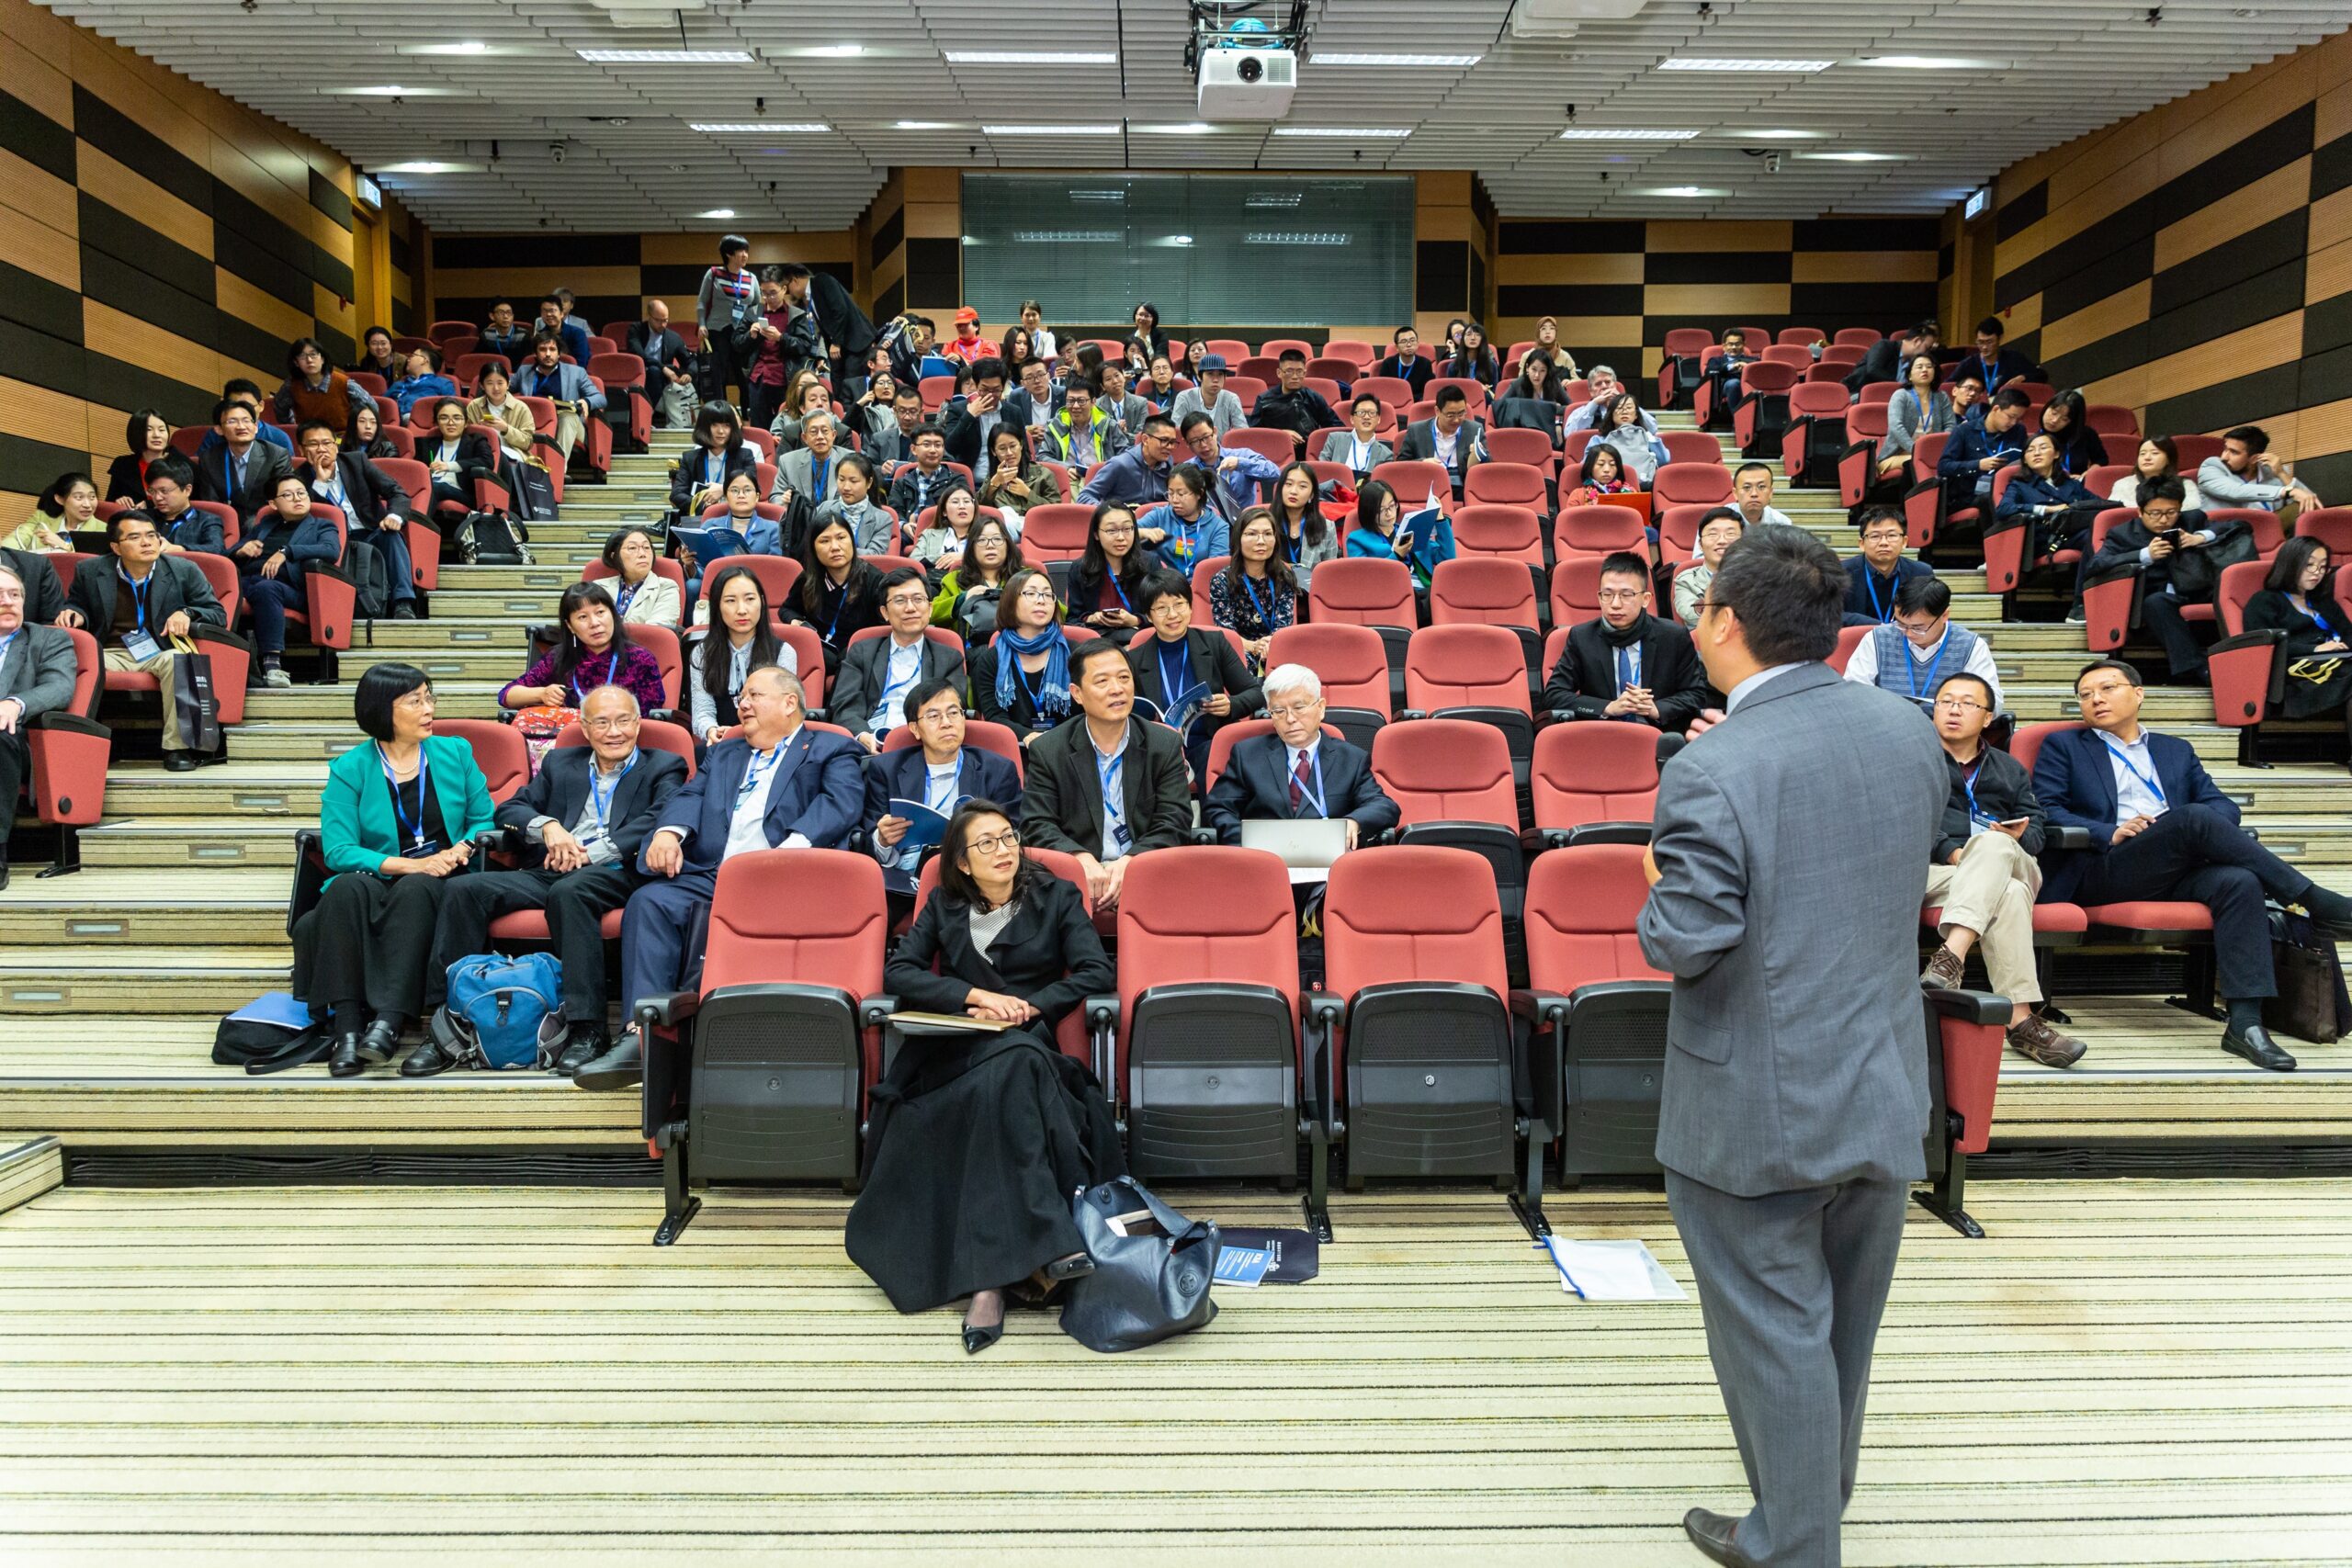 Image of a person taking seminar